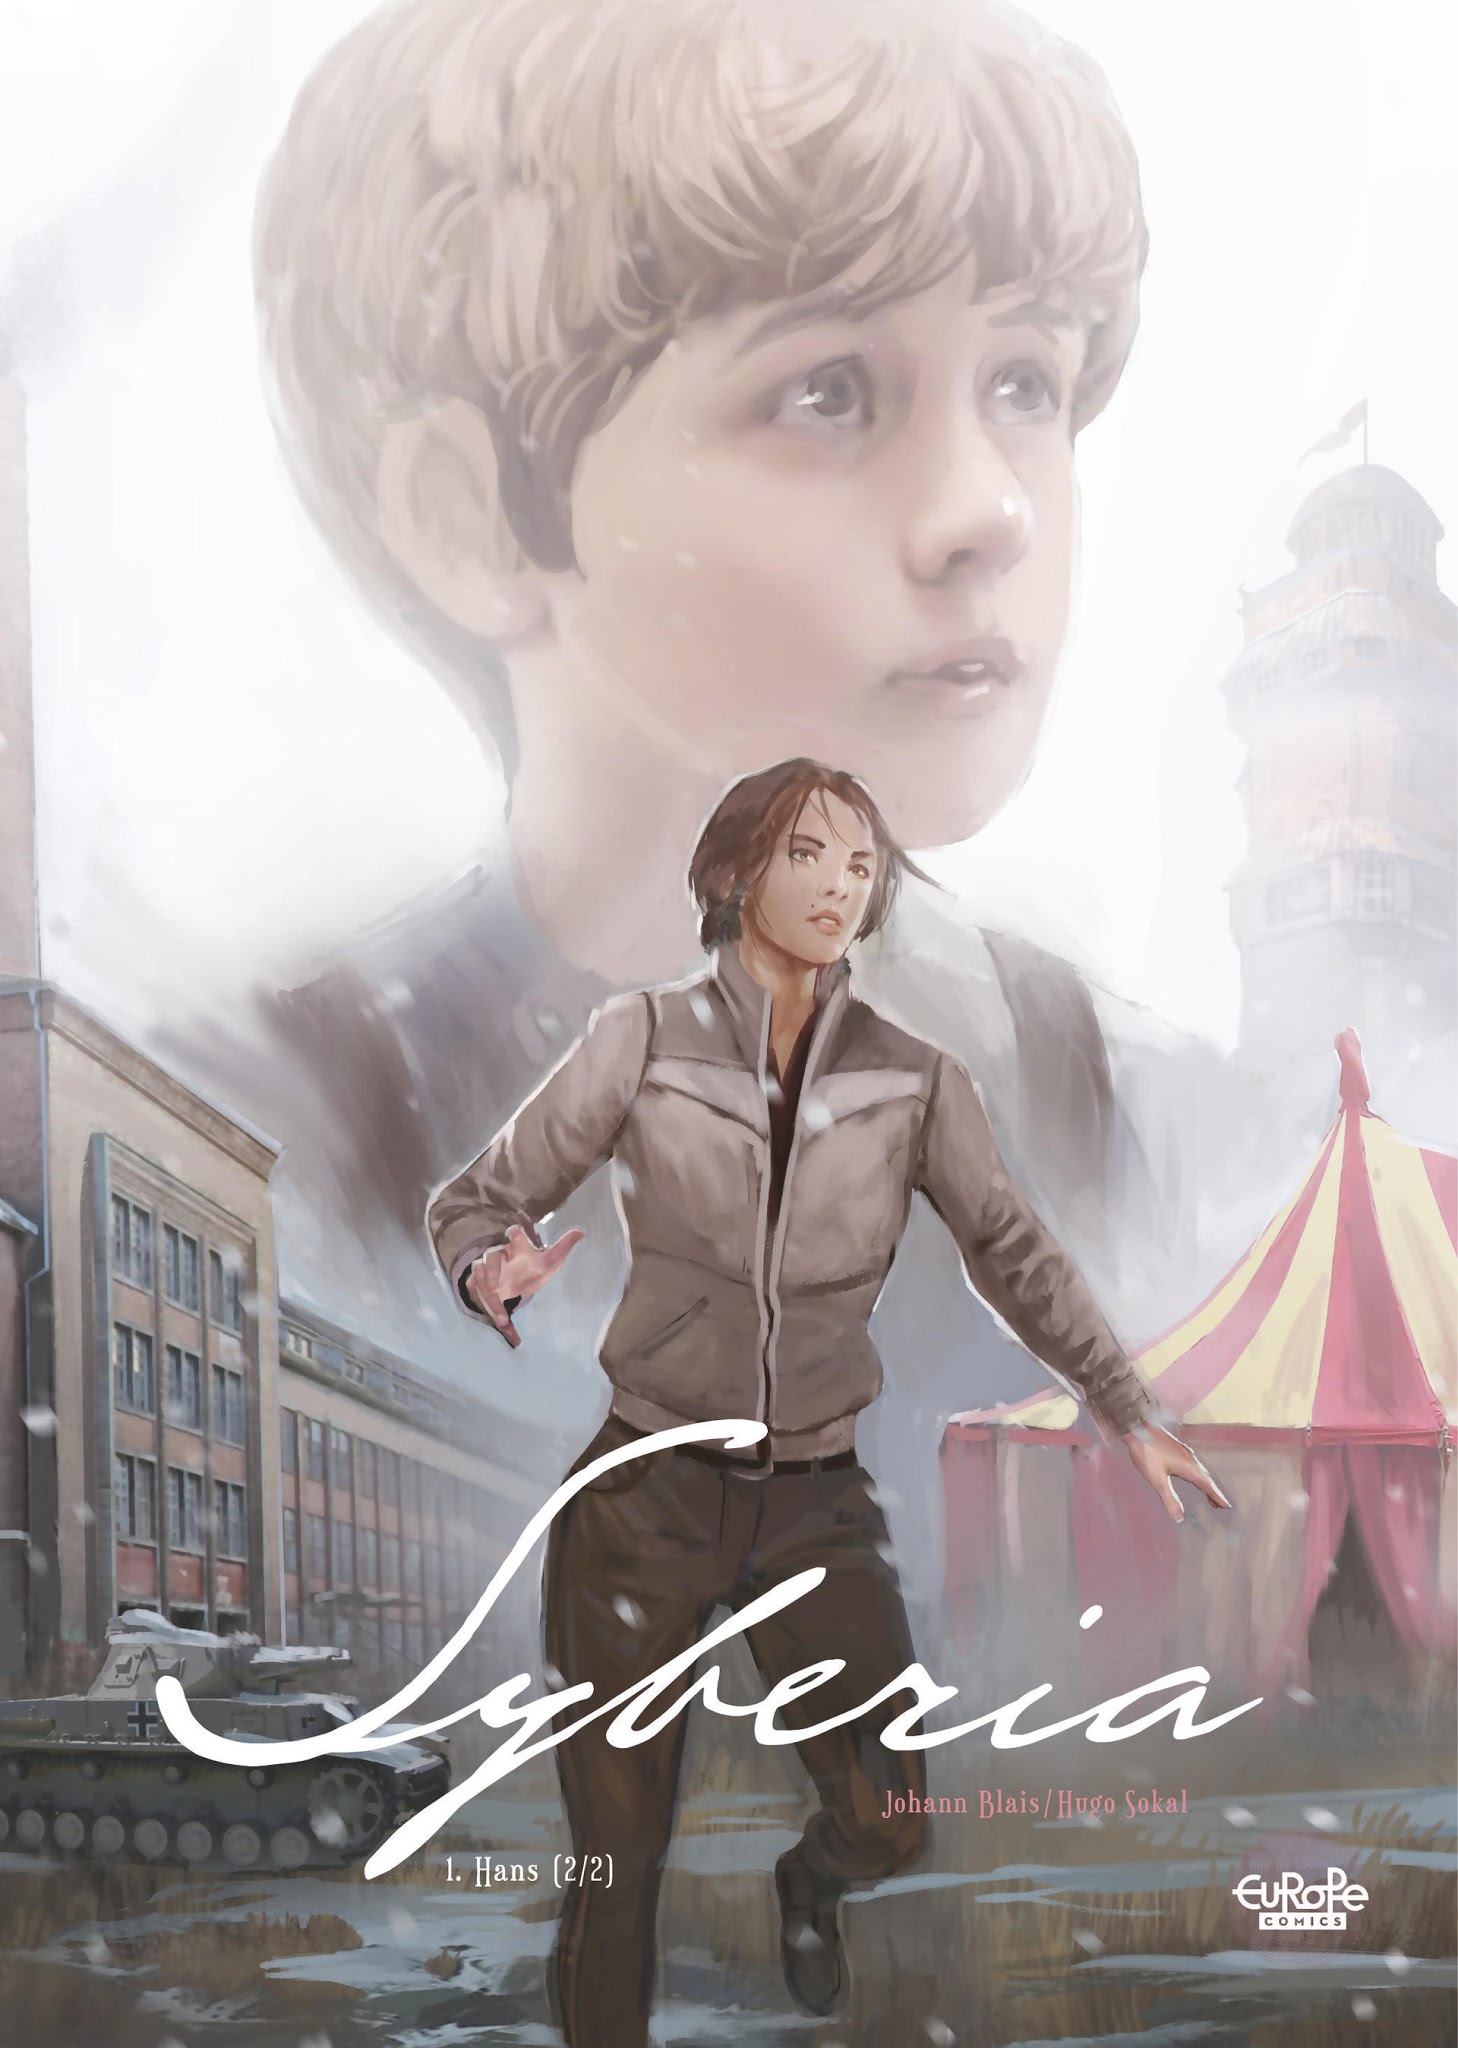 Read online Syberia comic -  Issue #2 - 1